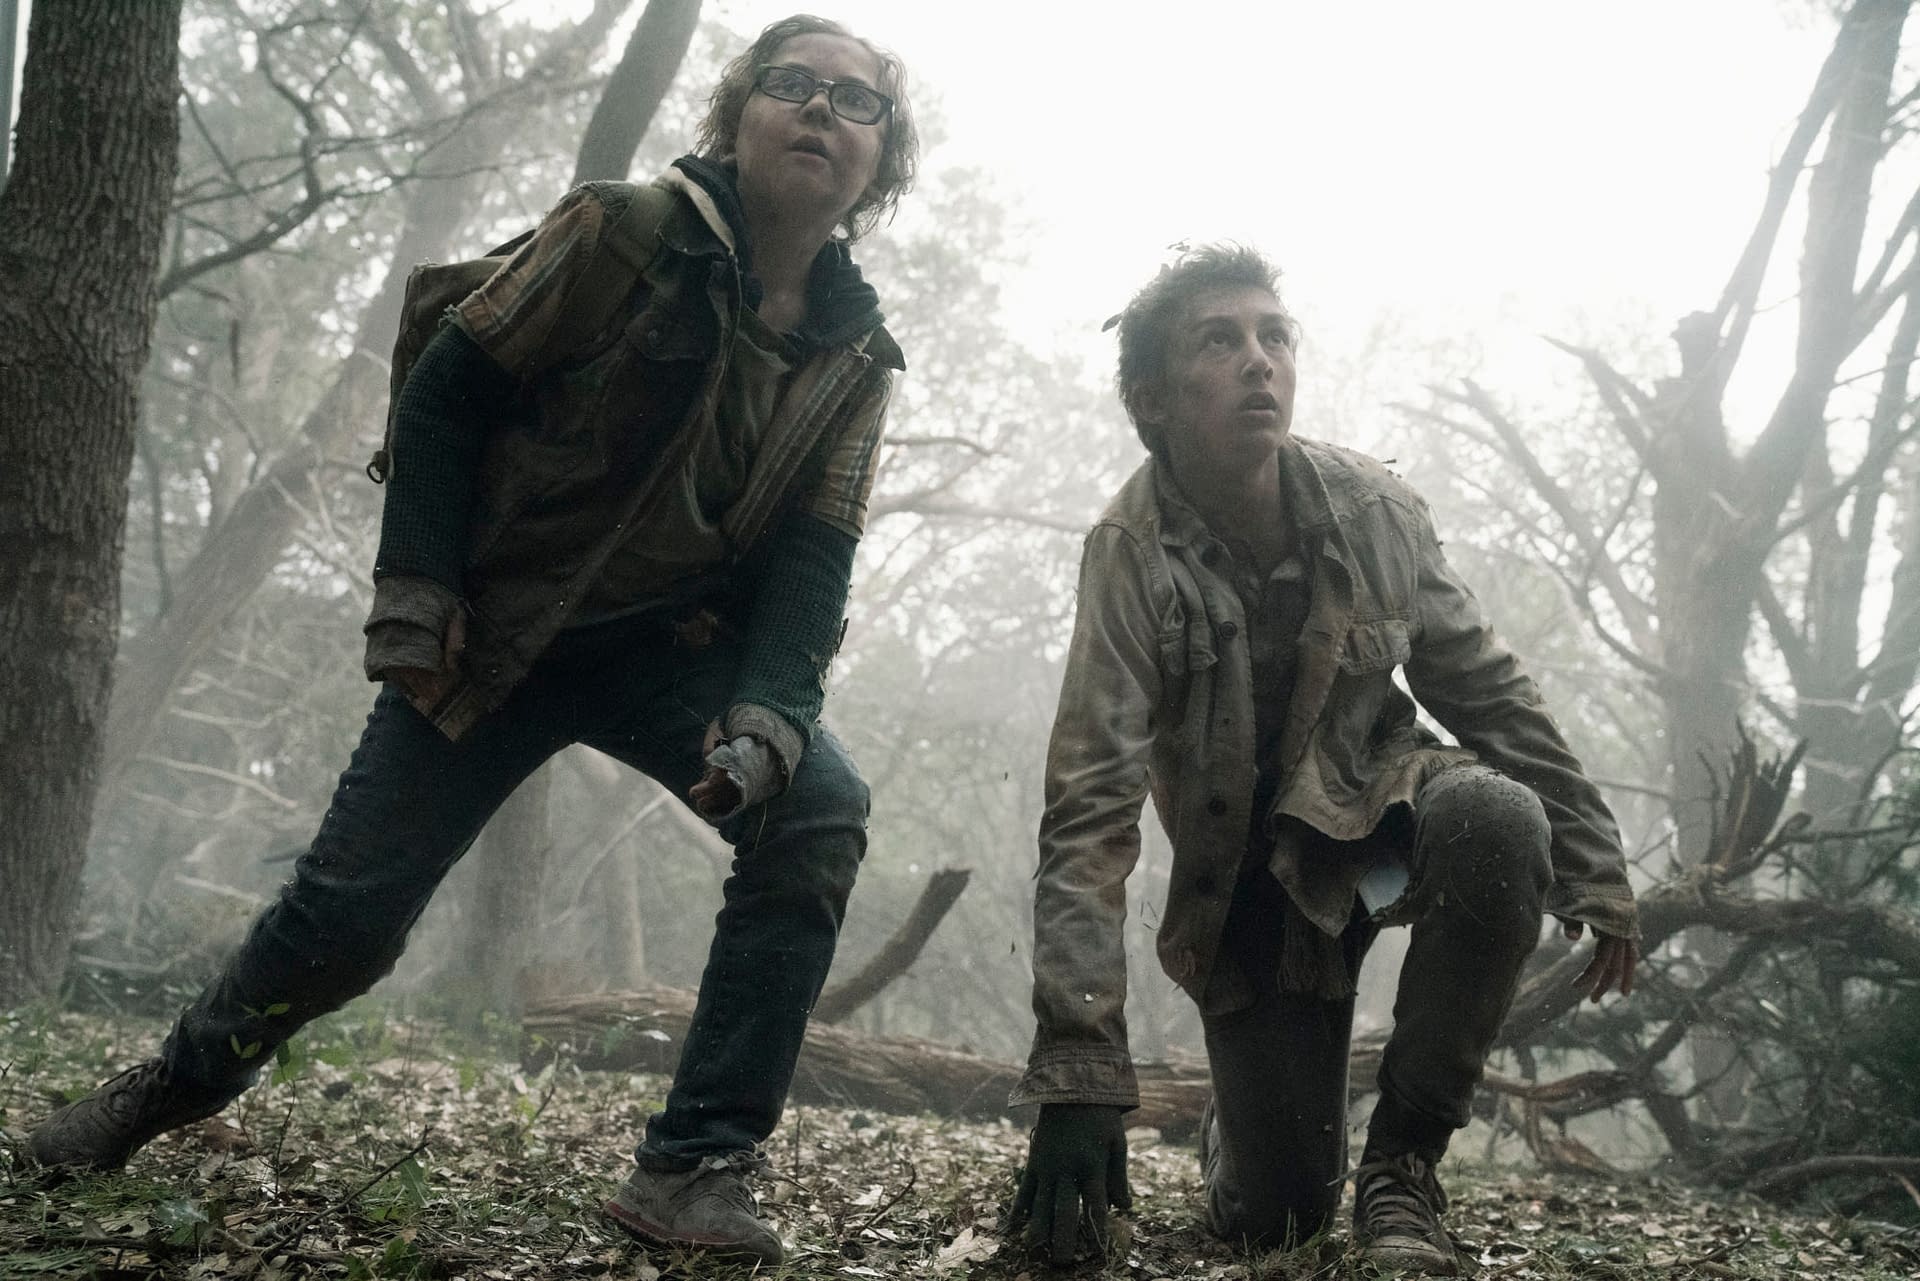 'Fear the Walking Dead' Season 5: New Faces, Jazz Hands and Dorie's "Brightside" [VIDEO]